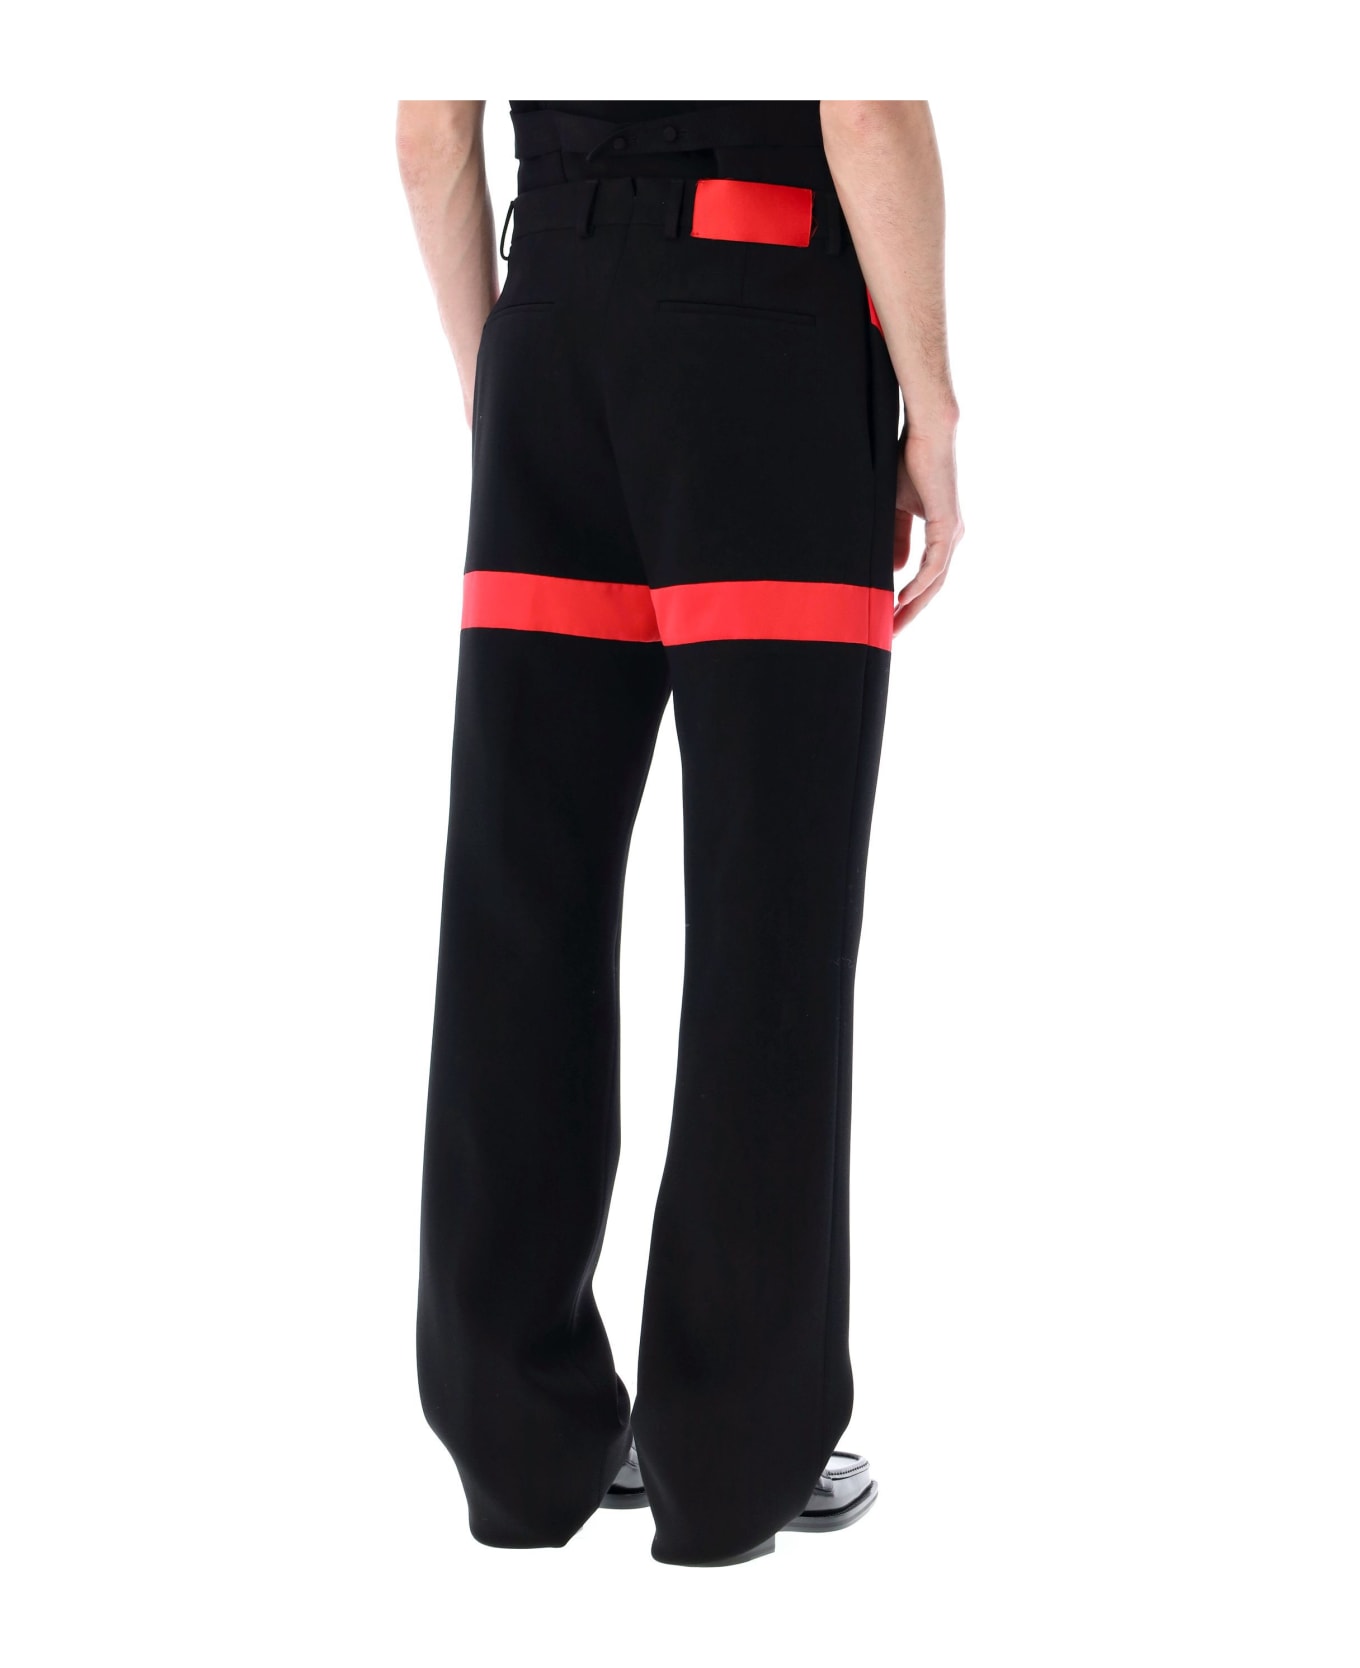 Ferragamo Tailored Pants With Inlays - BLACK RED